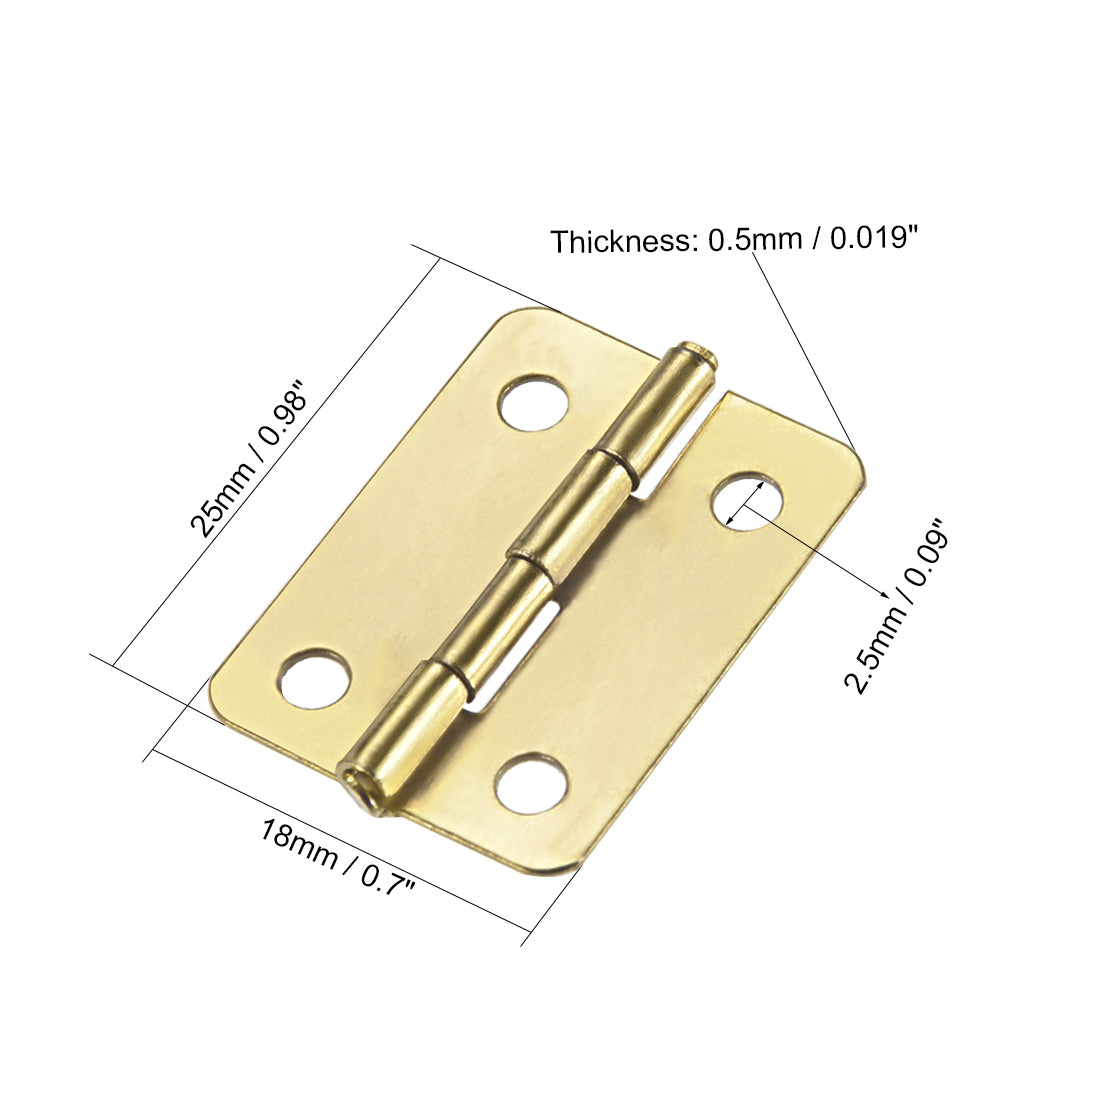 uxcell Uxcell 0.98" Mini Hinge Jewelry Case Wooden Box Hinges Fittings Golden Plain 15pcs